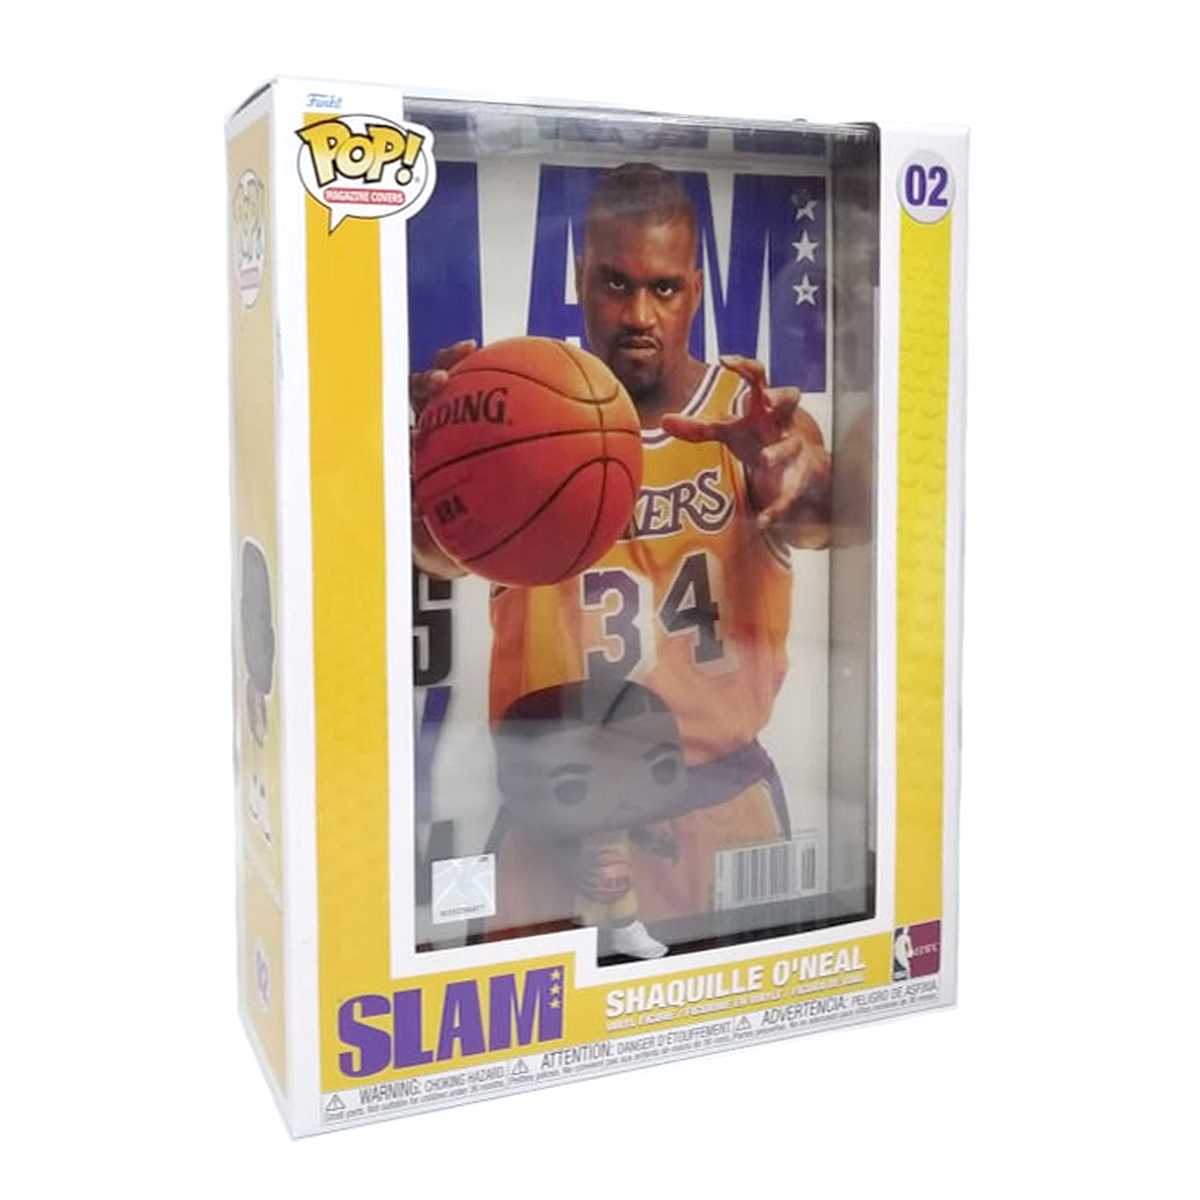 Funko Pop! Magazine Covers NBA Slam Shaquille Oneal Los Angeles Lakers figure número 02